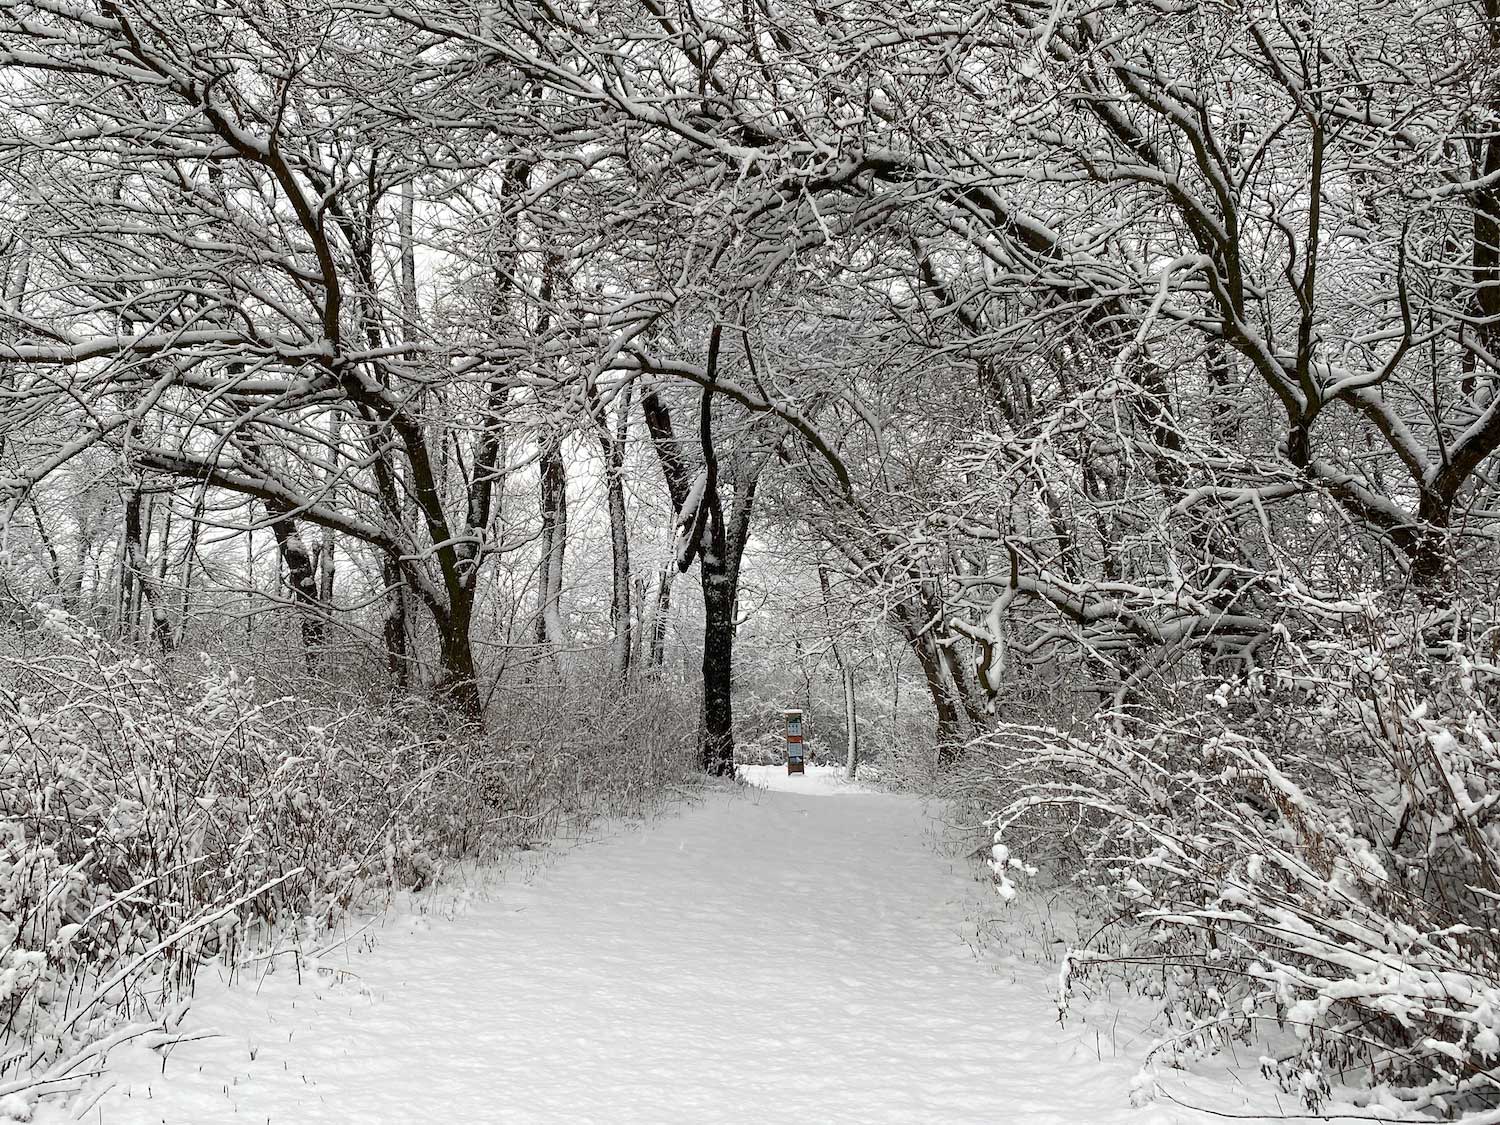 A snow-covered trail and trees.